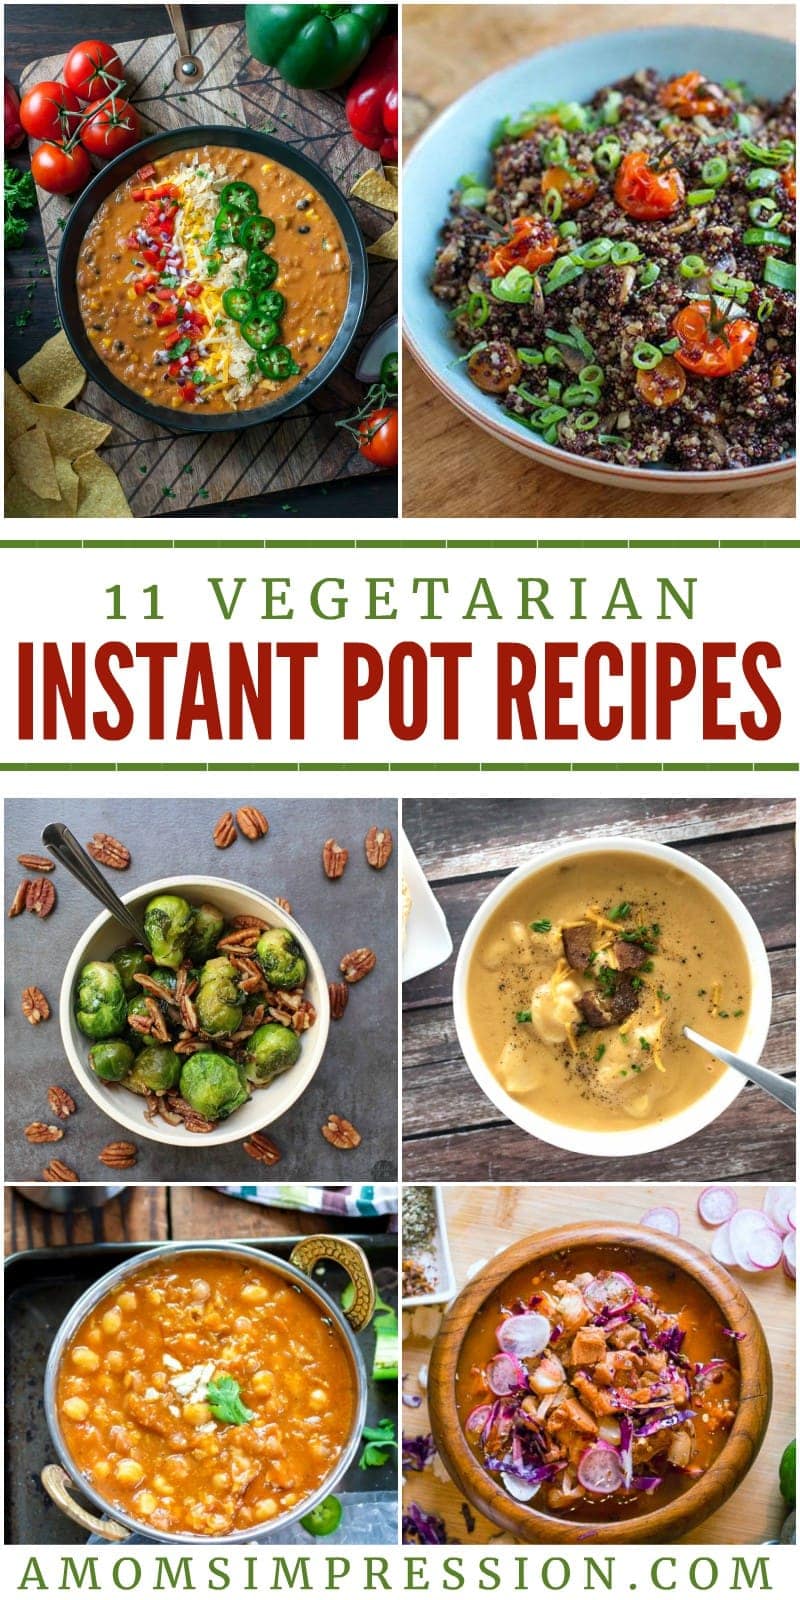 A great round up of vegetarian recipes that are easy to make in an Instant Pot. There are healthy options for dinner, breakfast or lunch. You will find high-protein options, low-carb options and clean eating recipes.